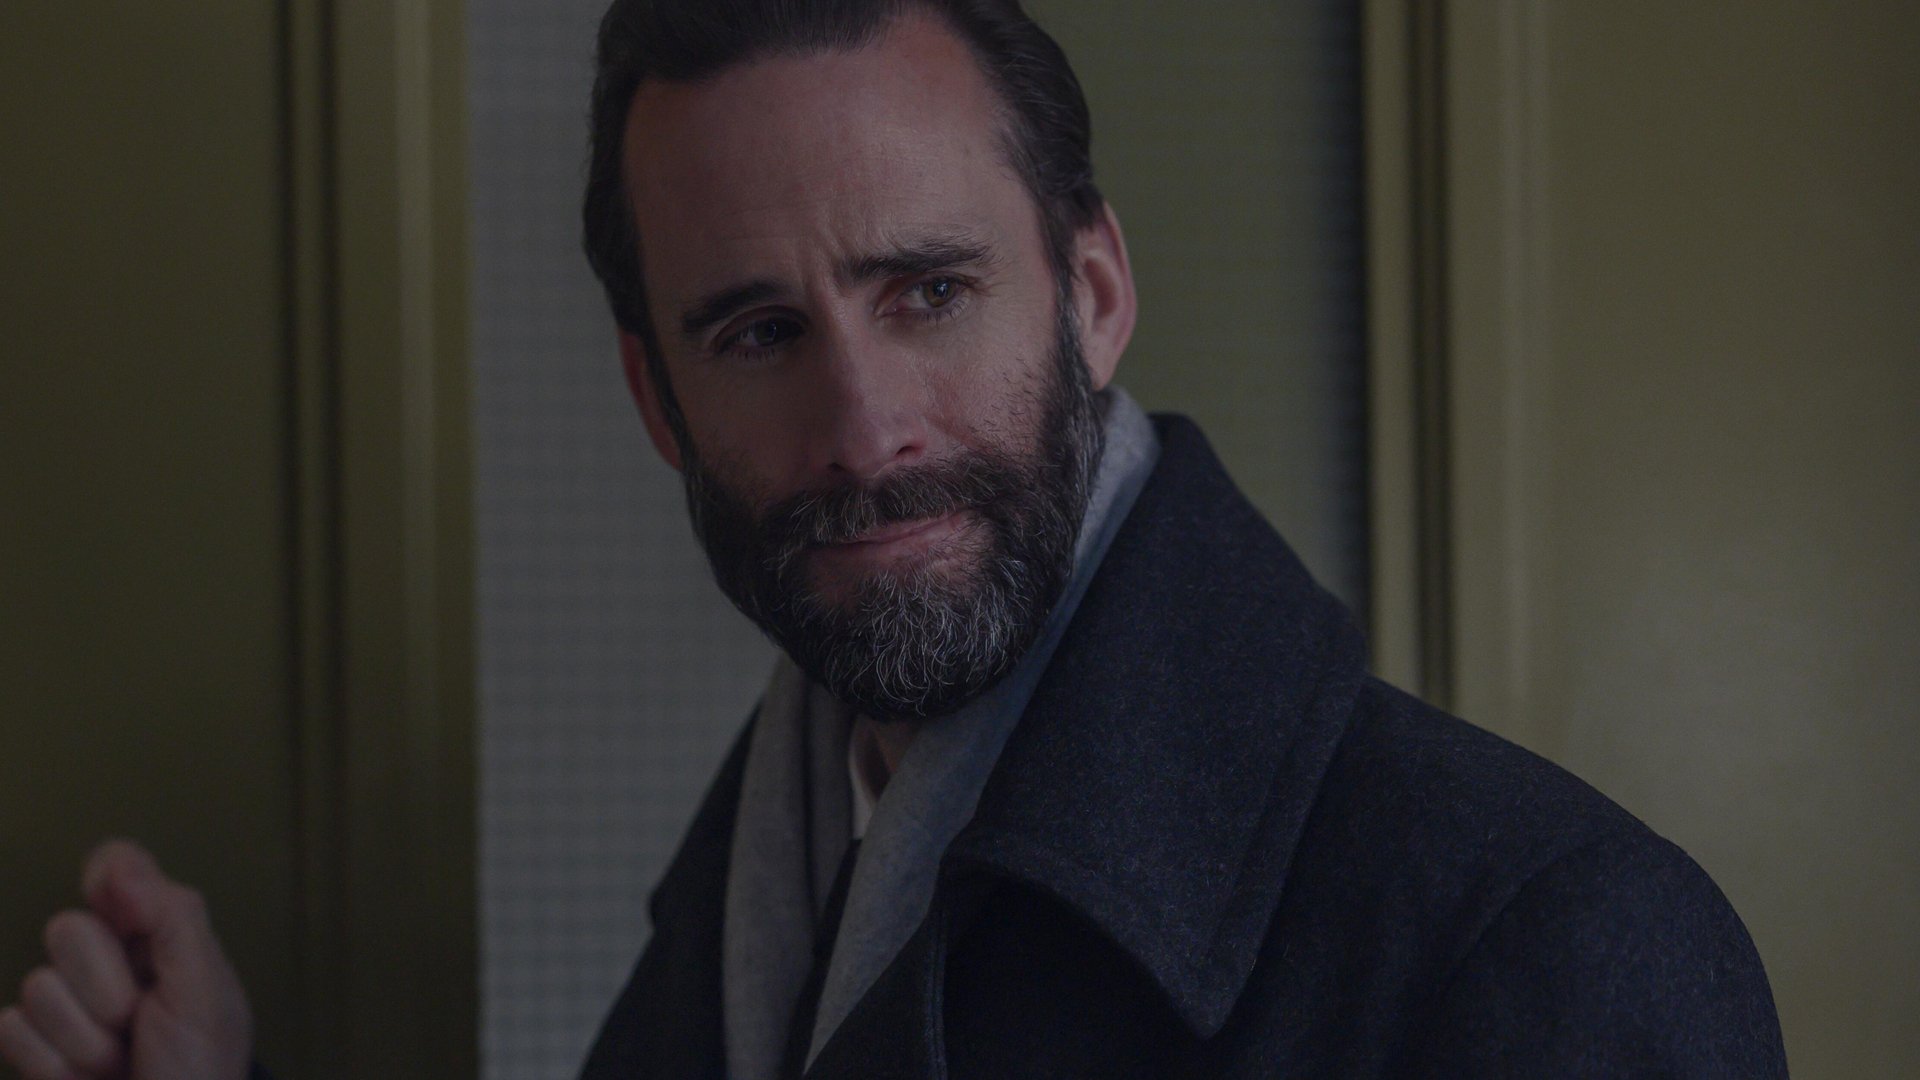 Joseph Fiennes as Fred Waterford says goodbye to Serena Joy in ‘The Handmaid’s Tale Season 4 finale, episode 10, ‘The Wilderness’